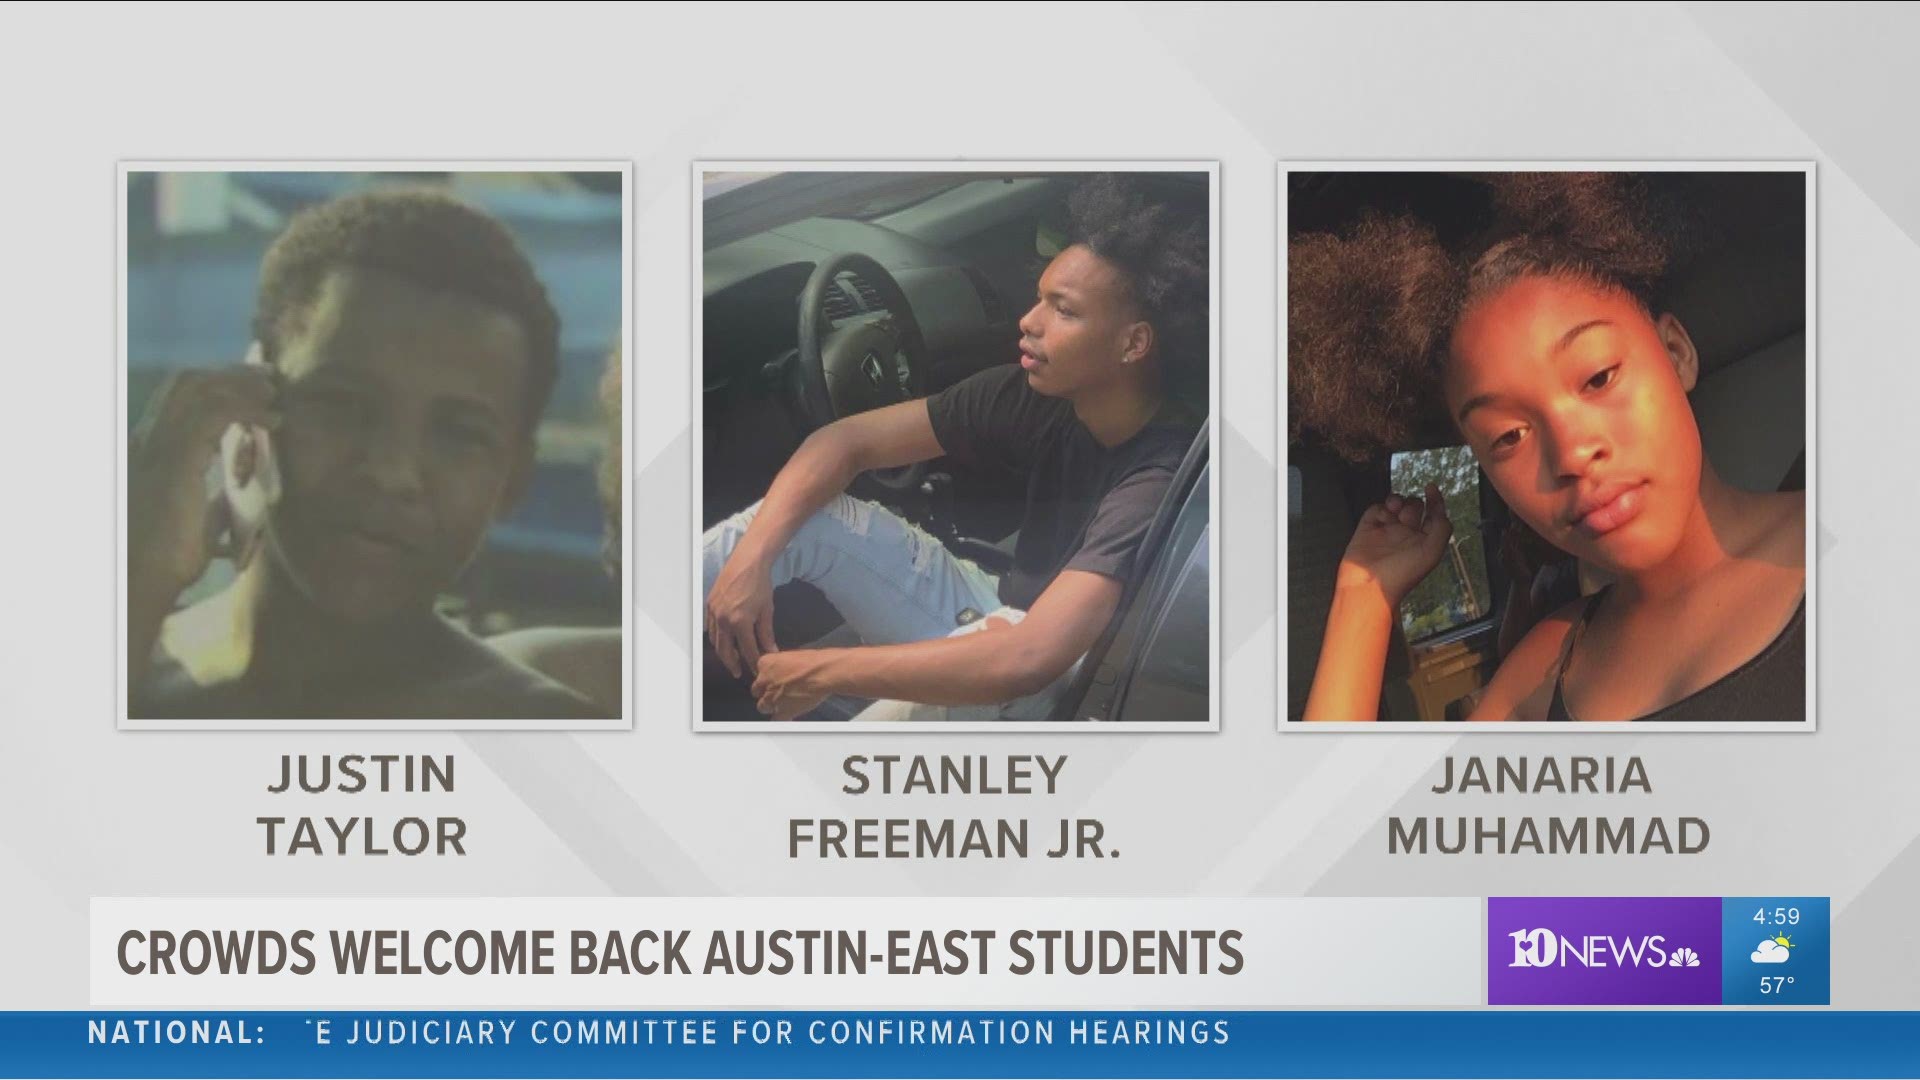 A crowd welcomed back grieving Austin-East High School students Monday.